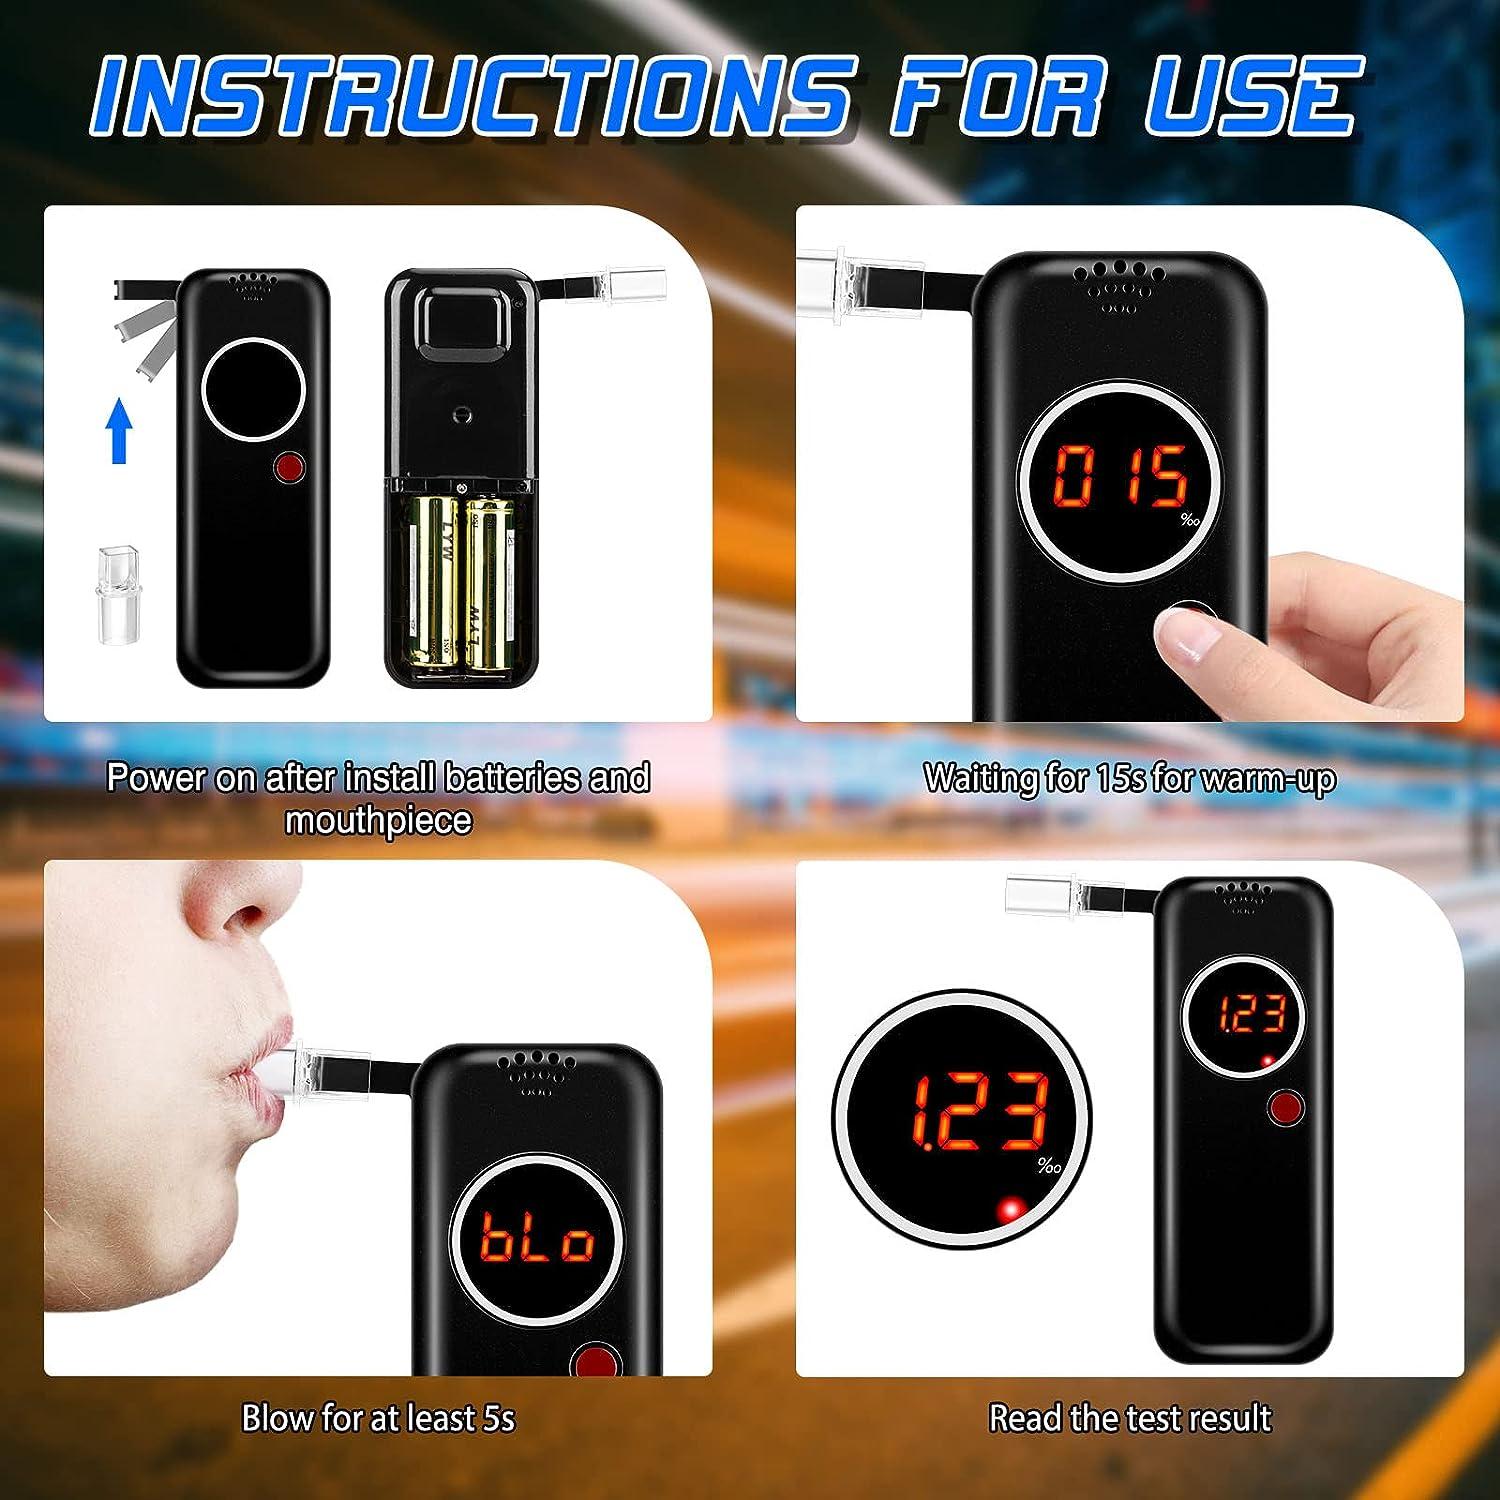 Ht-611 Alcohol Tester Digital Breath Alcohol Tester Alcohol Breathalyzer  Air Blowing Portable Lcd Display Breathalyzerdropship